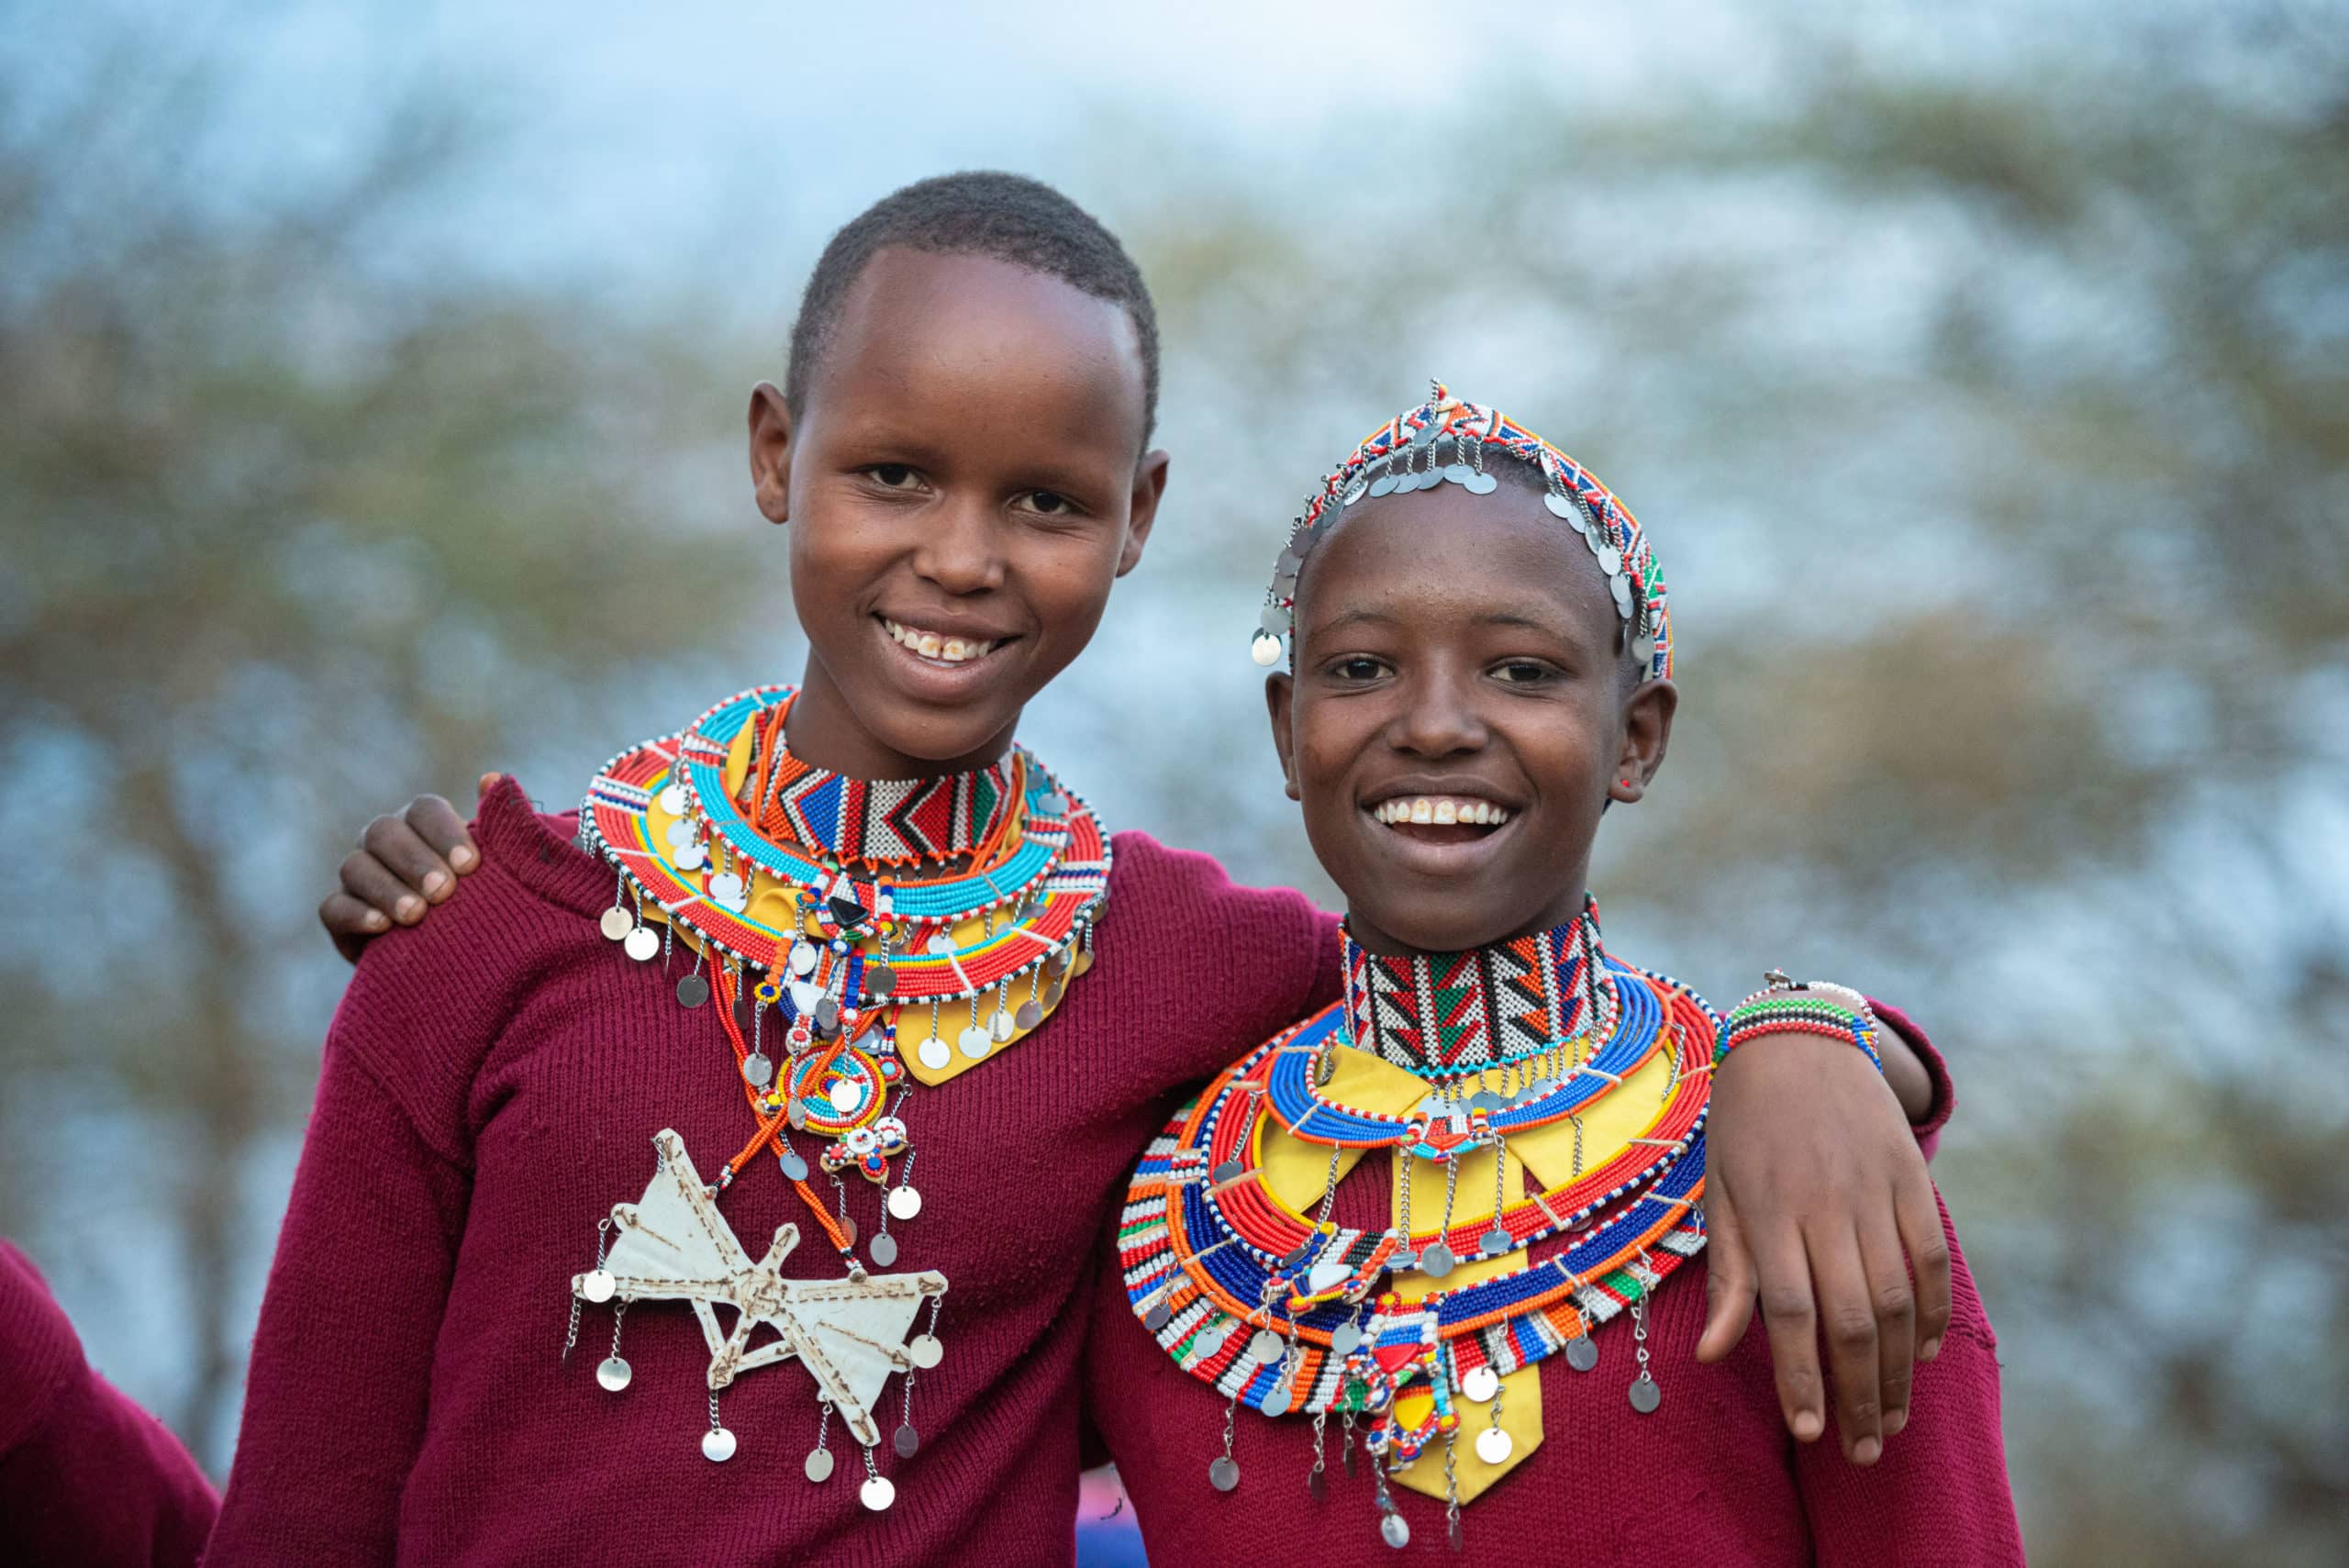 Two girls participating in an Alternative Rites of Passage Ceremony in Kenya.